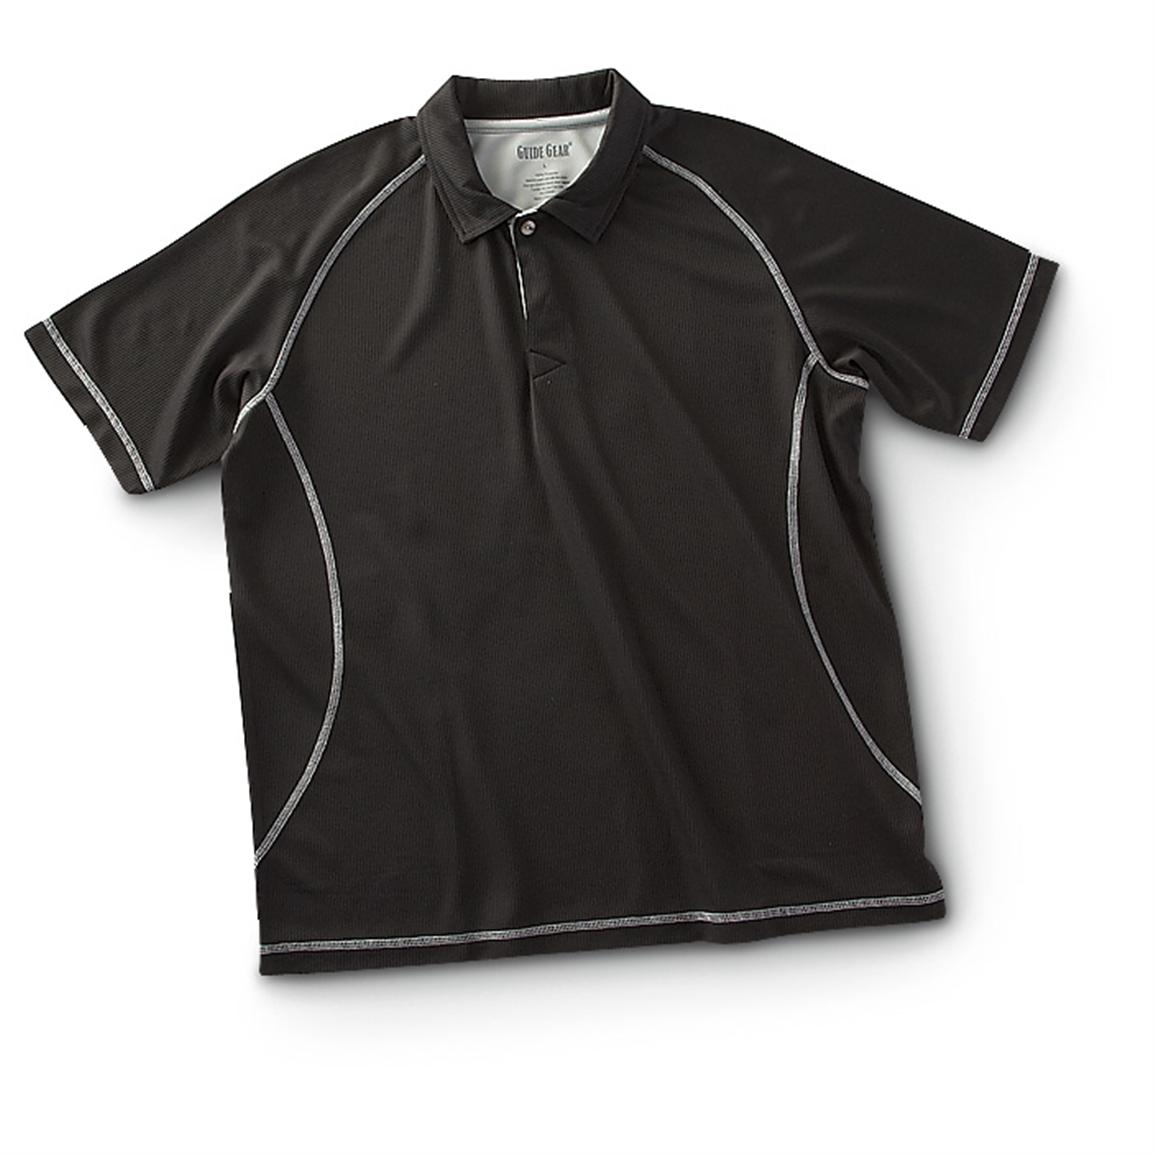 Guide Gear COOLMAX Polo Shirt - 234668, Shirts at Sportsman's Guide